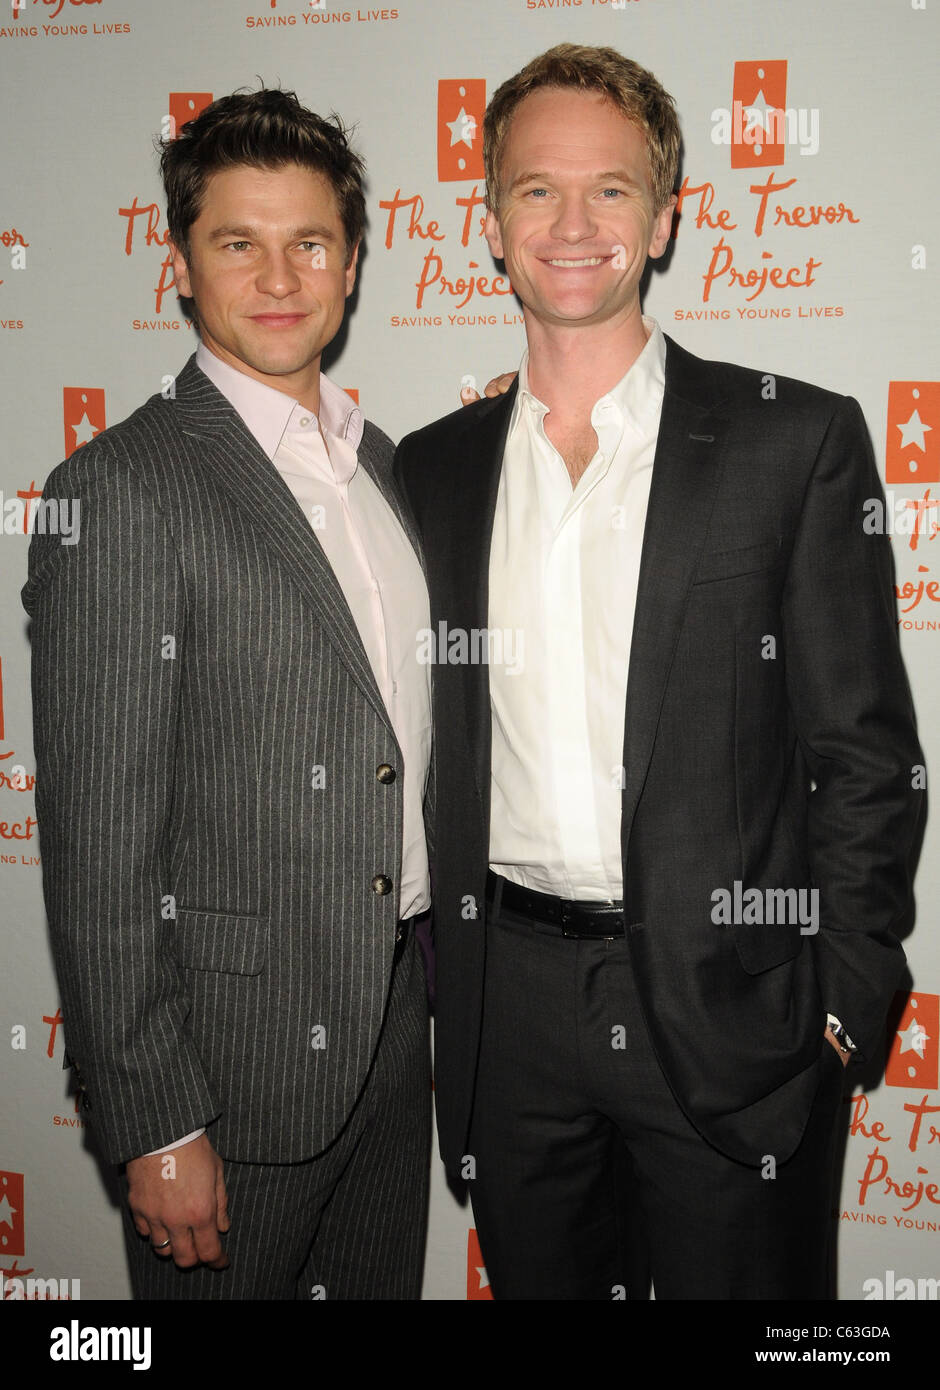 Neil Patrick Harris at arrivals for Trevor LIVE Annual Benefiting for The Trevor Project, The Hollywood Palladium, Los Angeles, Stock Photo